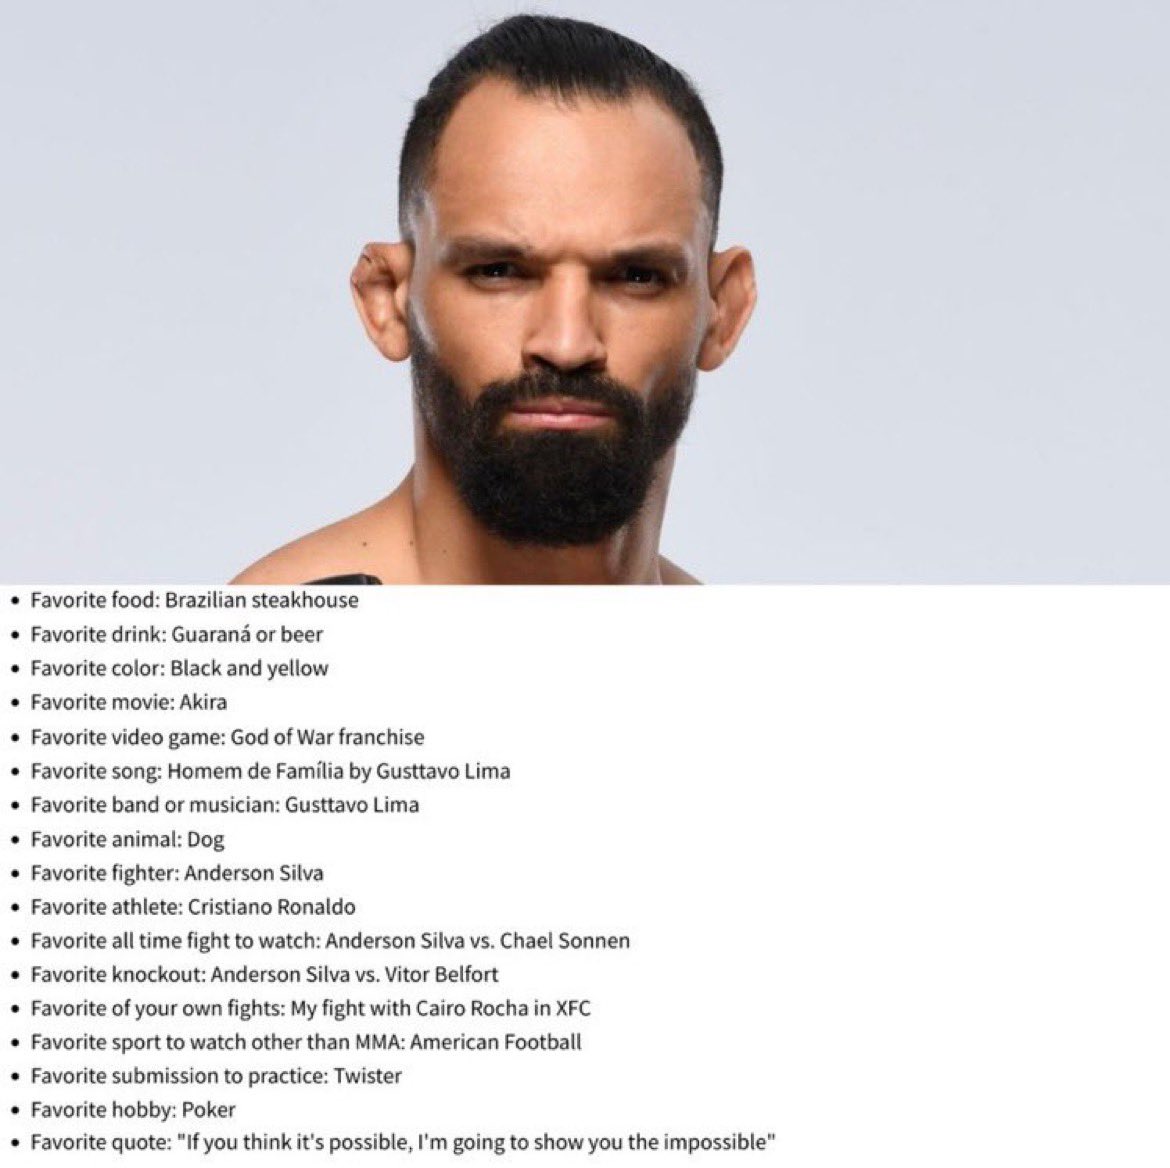 Humanizing Athletes: Michel Pereira Michel lists some of his favorite things ahead of his fight this weekend at #UFC301